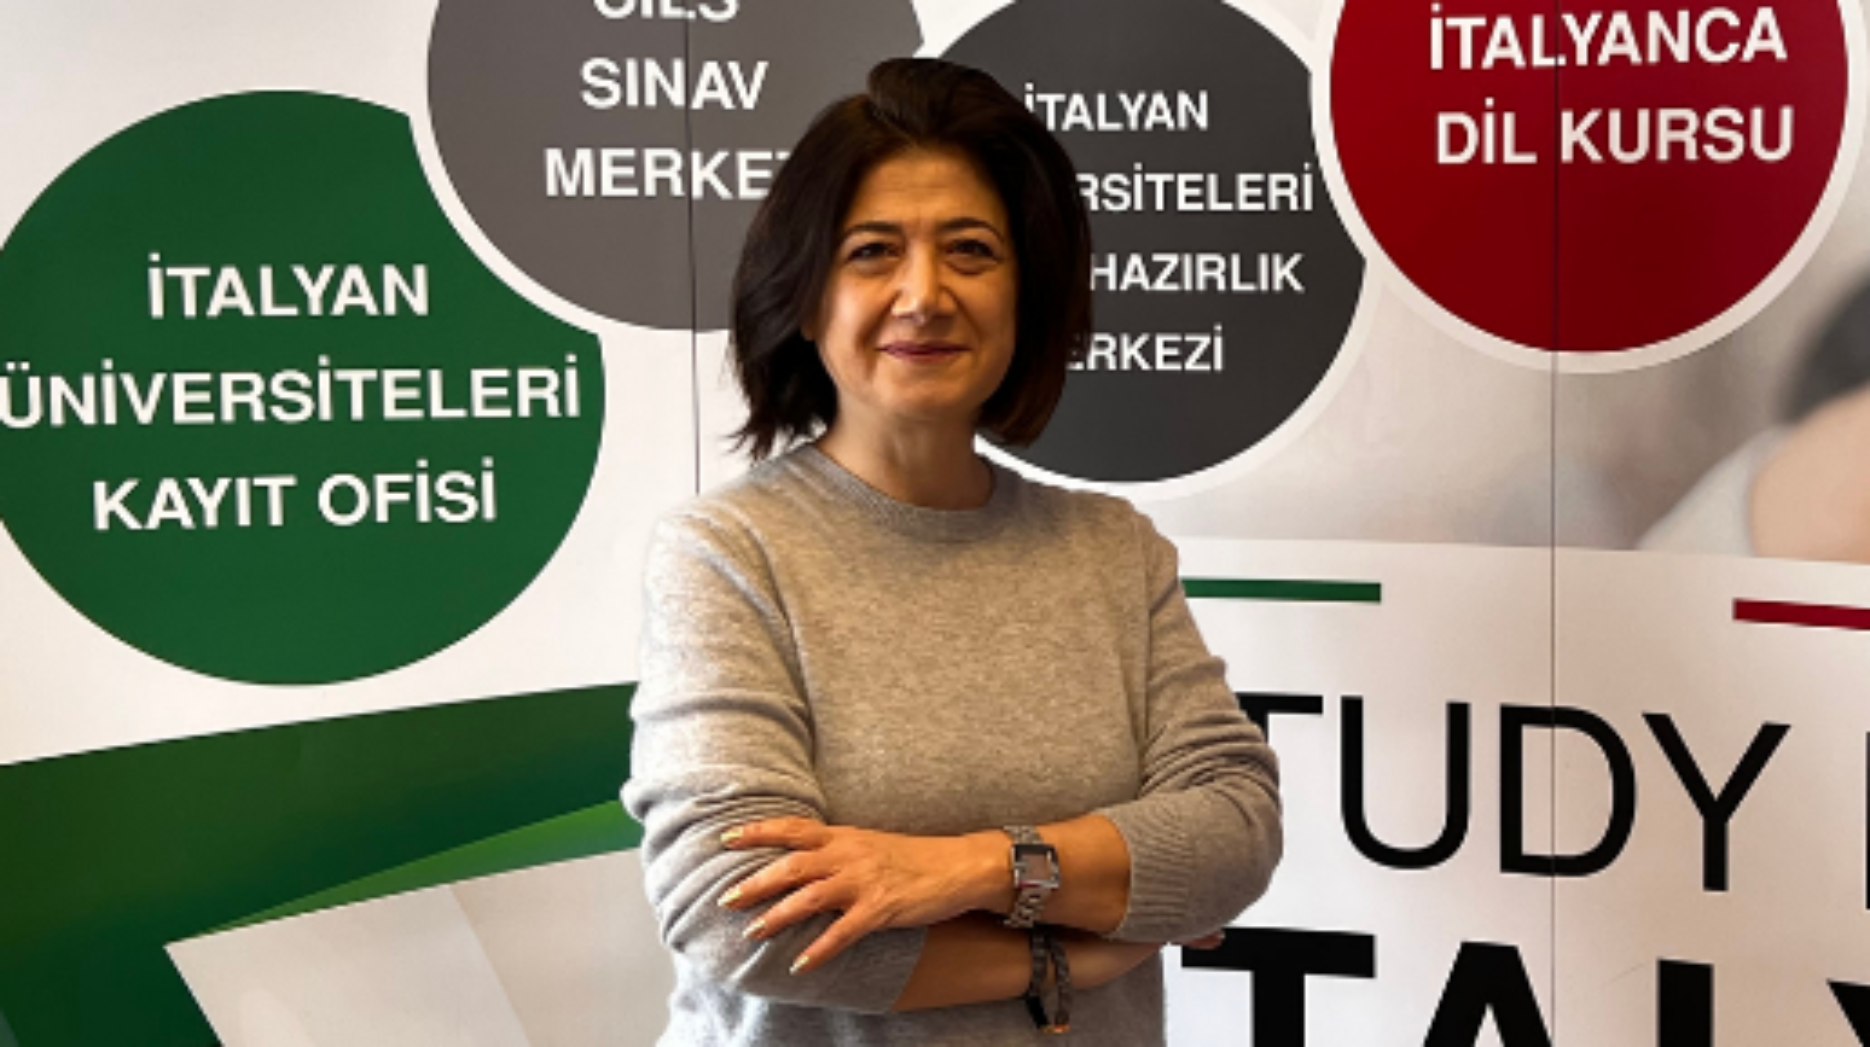 Neslihan Ҫebi and the relevance of Turkish market for Italy